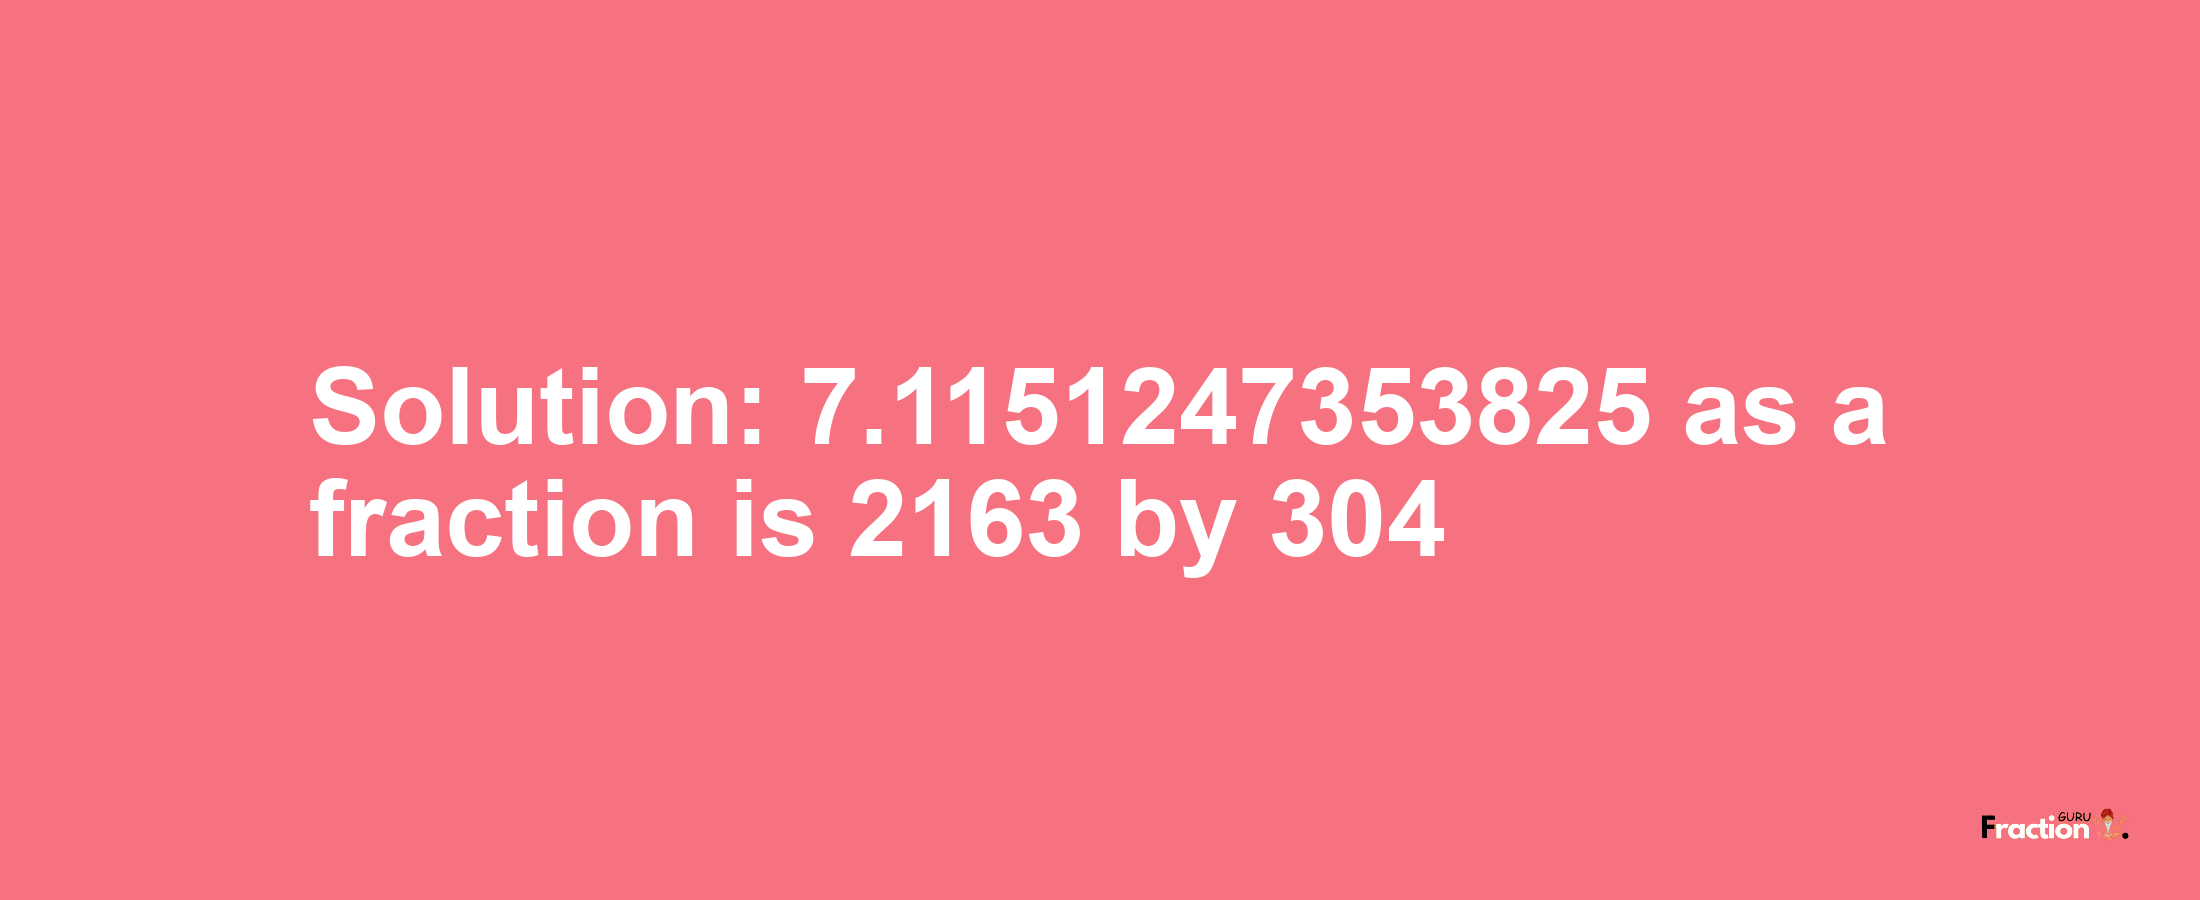 Solution:7.1151247353825 as a fraction is 2163/304